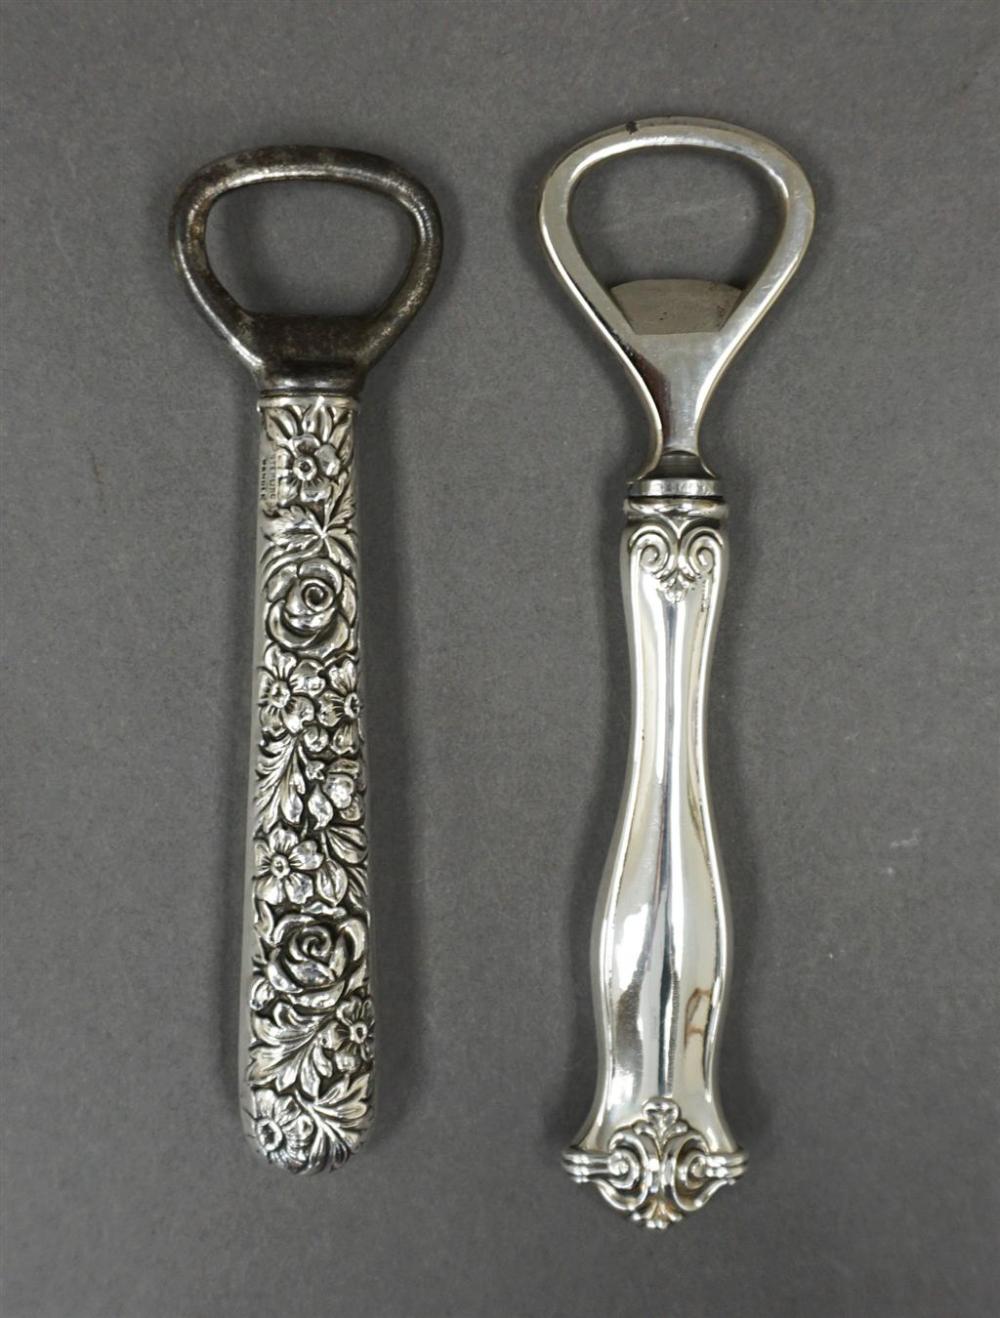 TWO STERLING SILVER HANDLED BOTTLE